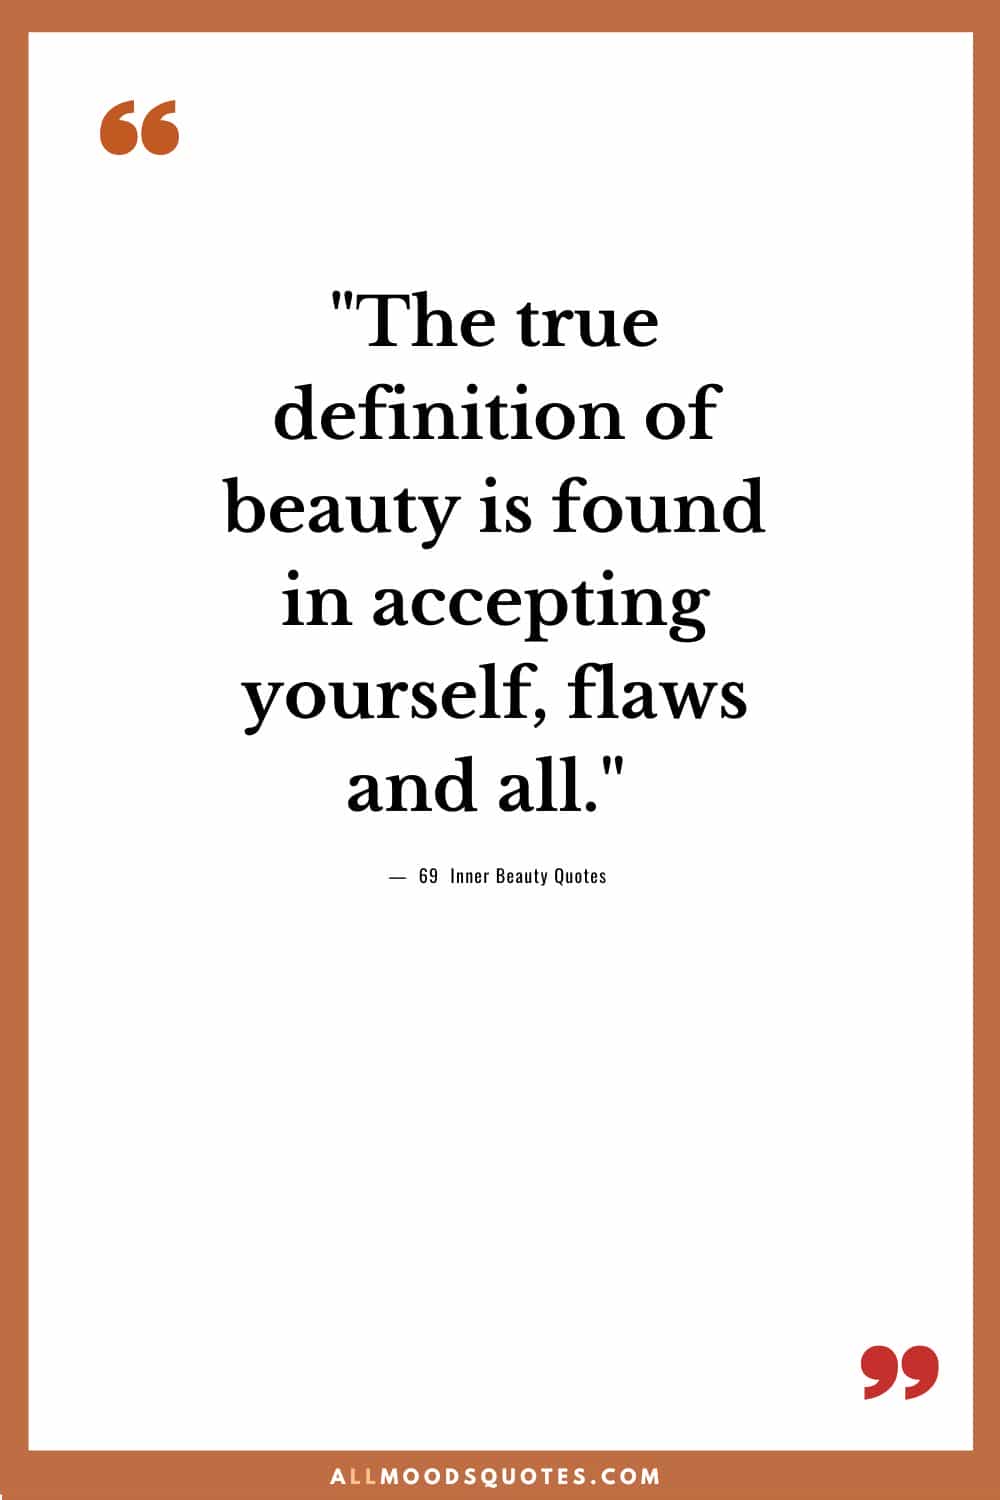 The true definition of beauty is found in accepting yourself, flaws and all."